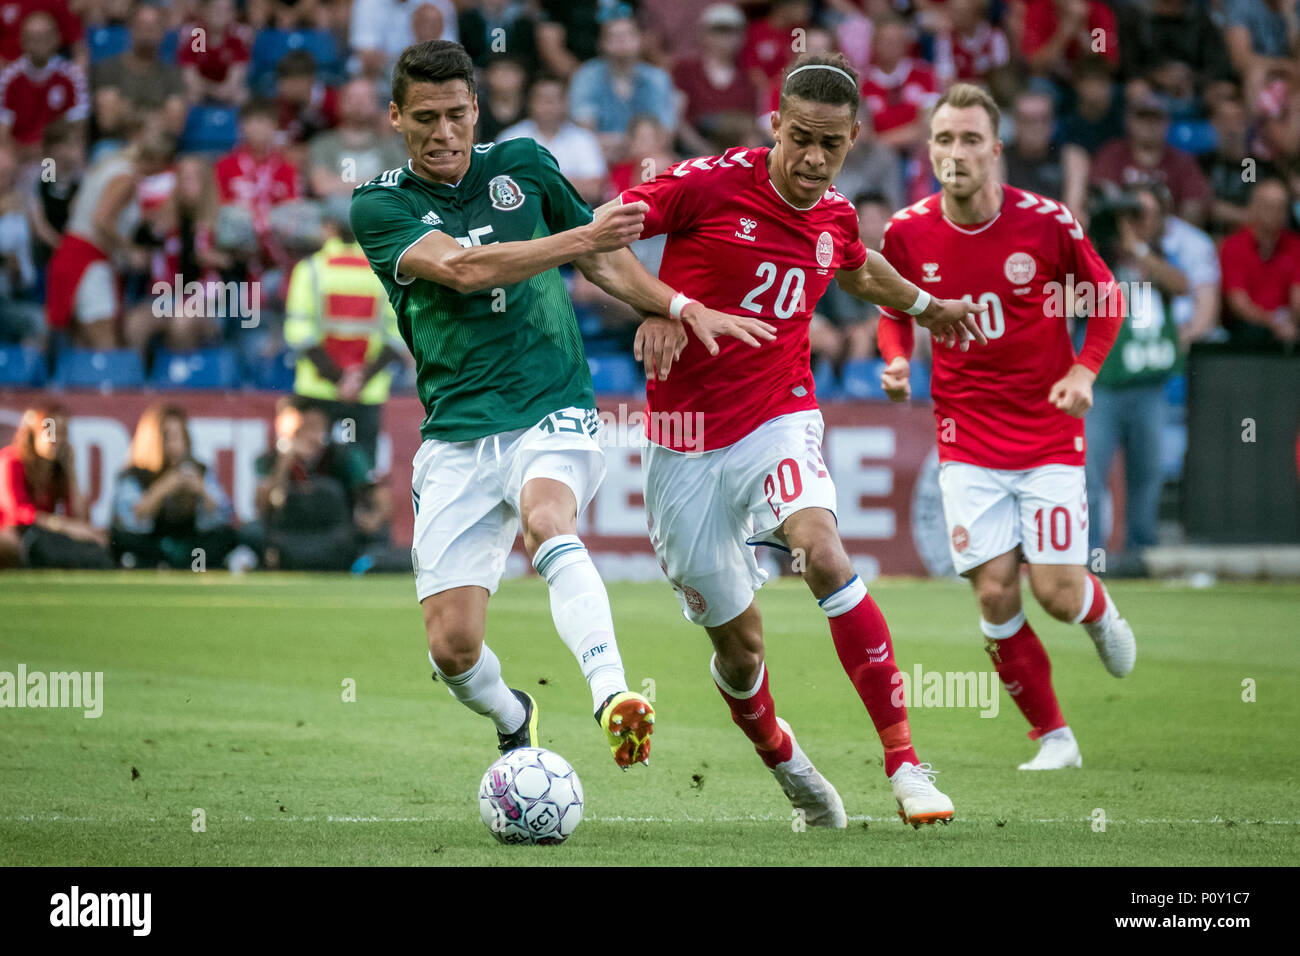 Denmark, Brøndby - June 09, 2018. Yussuf Poulsen (20) of Denmark and Hector Moreno (15) of Mexico seen during the football friendly between Denmark and Mexico at Brøndby Stadion. (Photo credit: Gonzales Photo - Kim M. Leland). Credit: Gonzales Photo/Alamy Live News Stock Photo